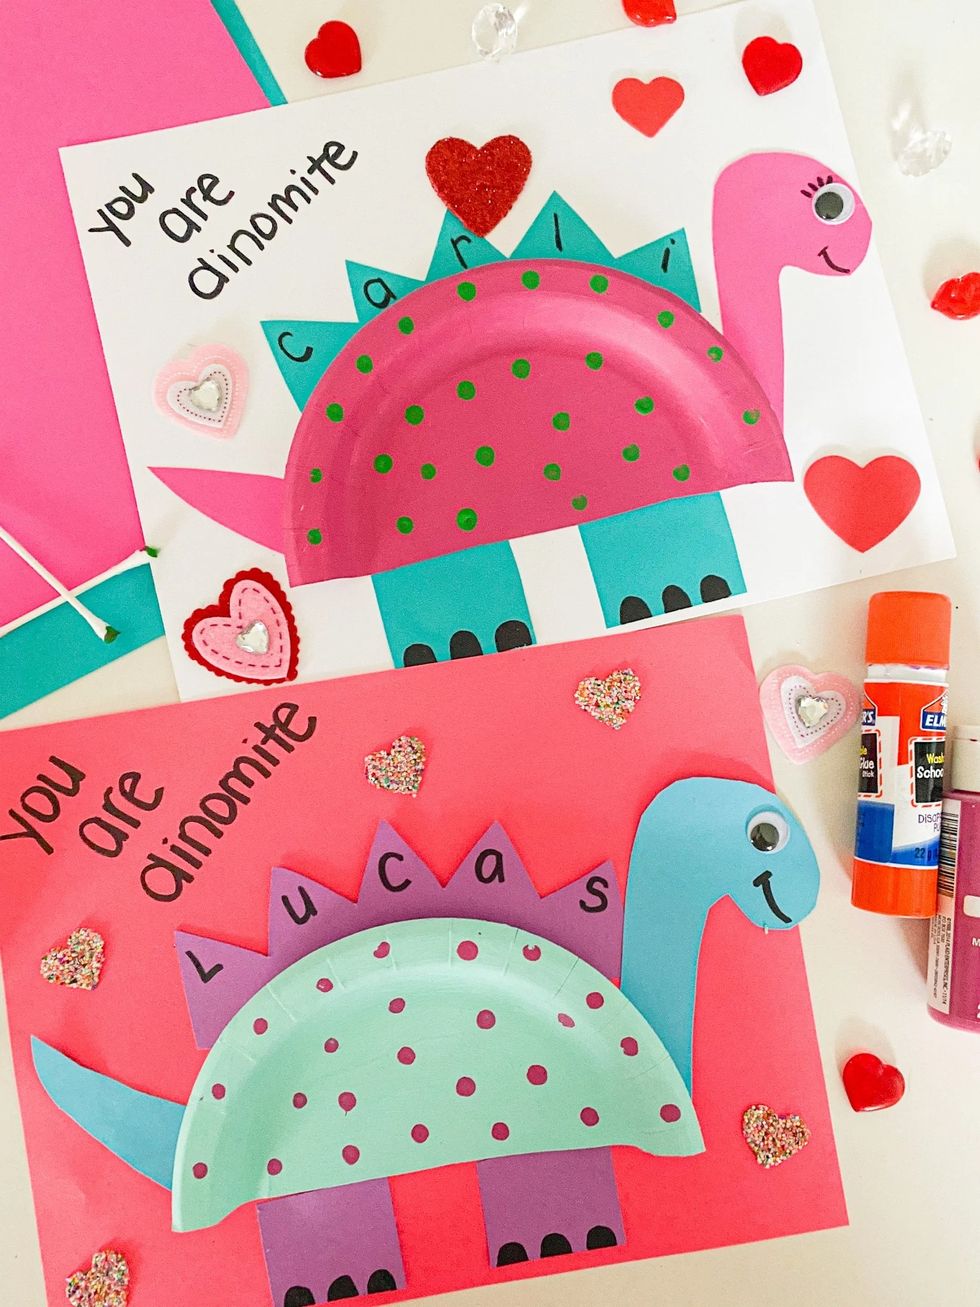 35 Easy Heart Art Projects For Kids